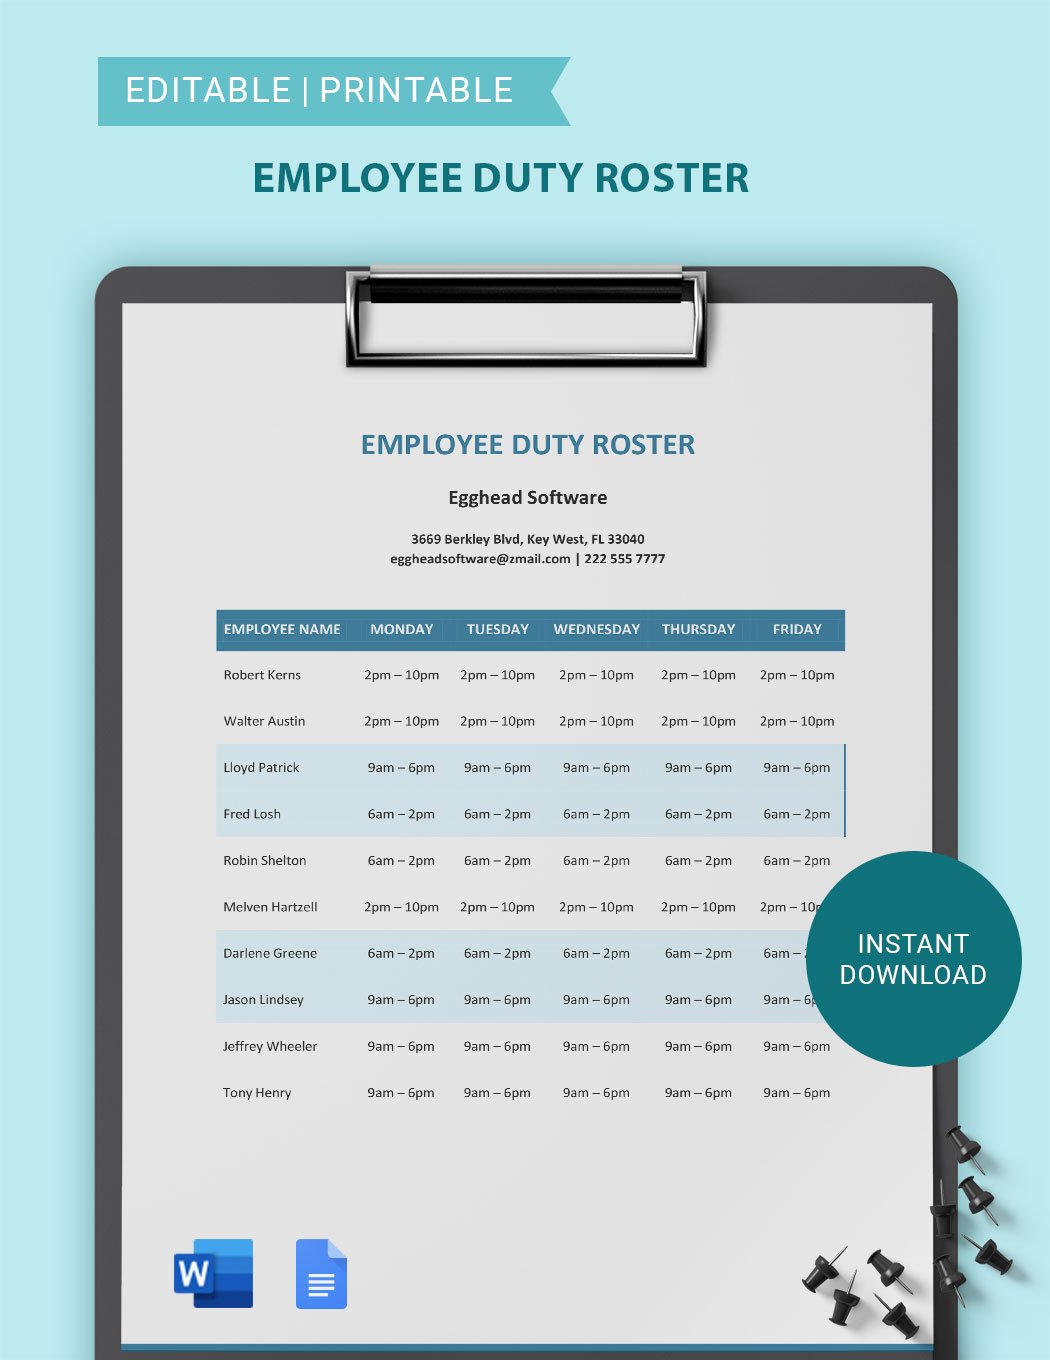 Employee Duty Roster Template